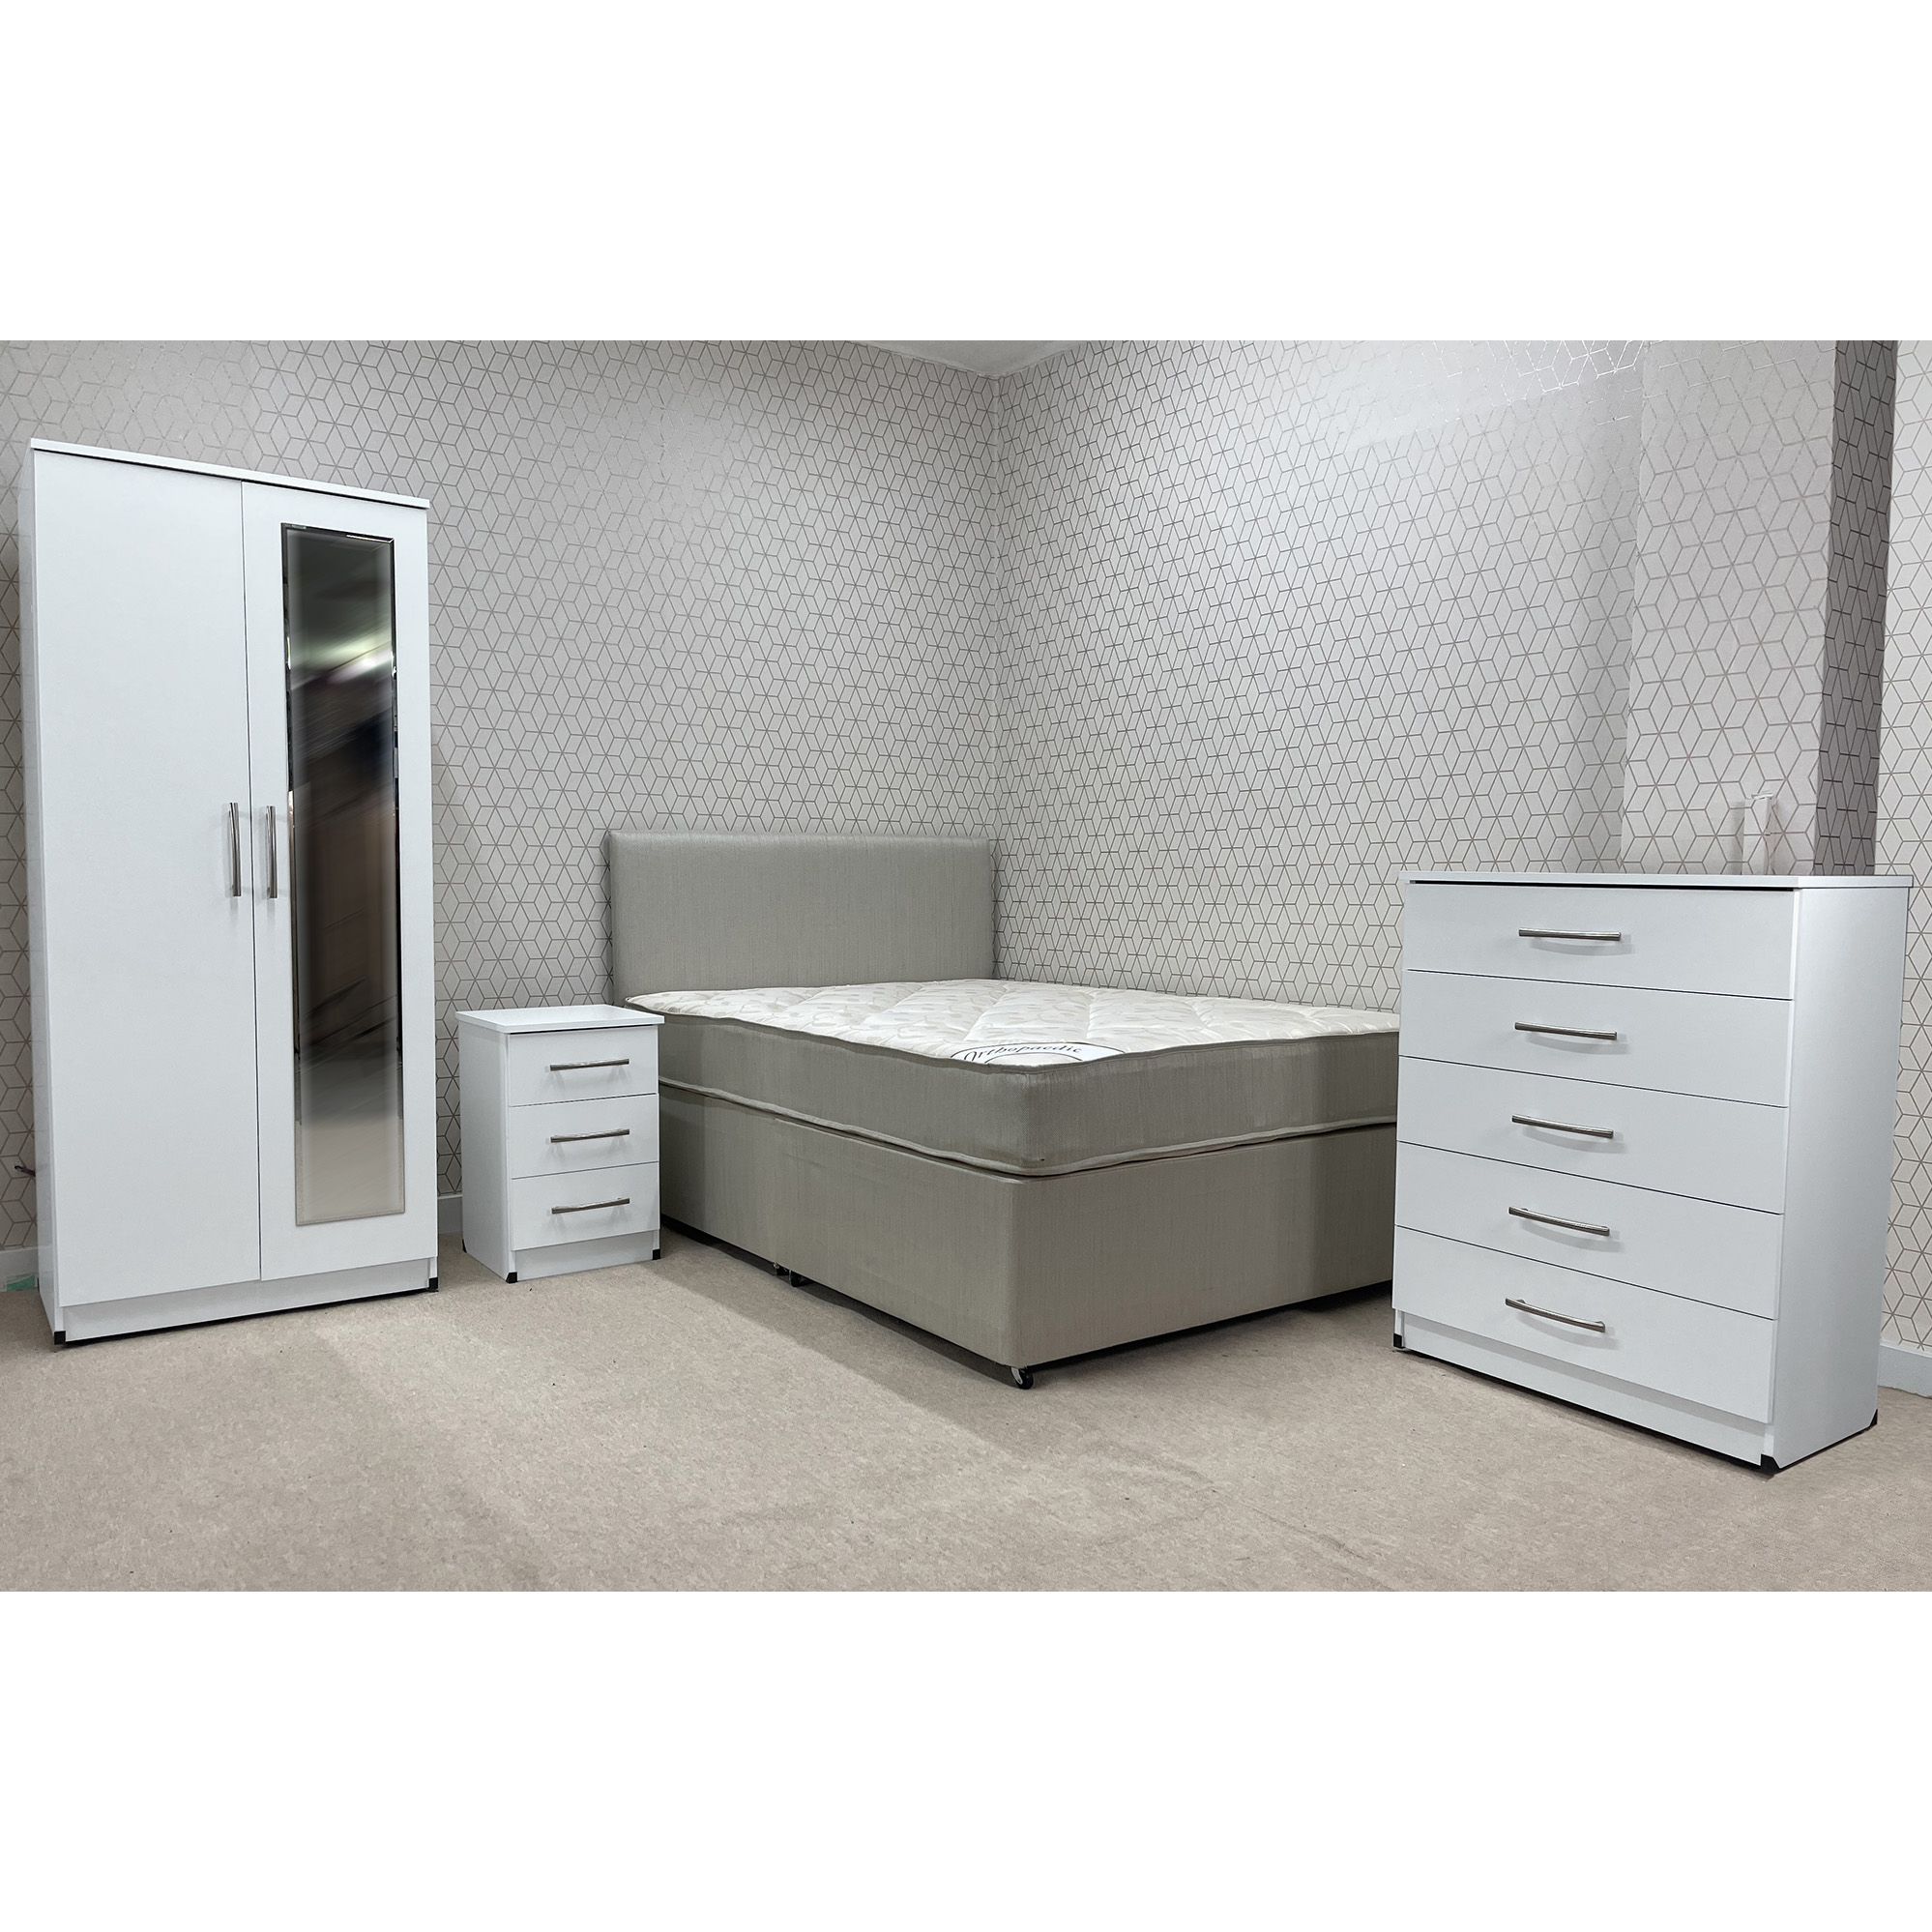 hmo furniture package landlord furniture package 4d